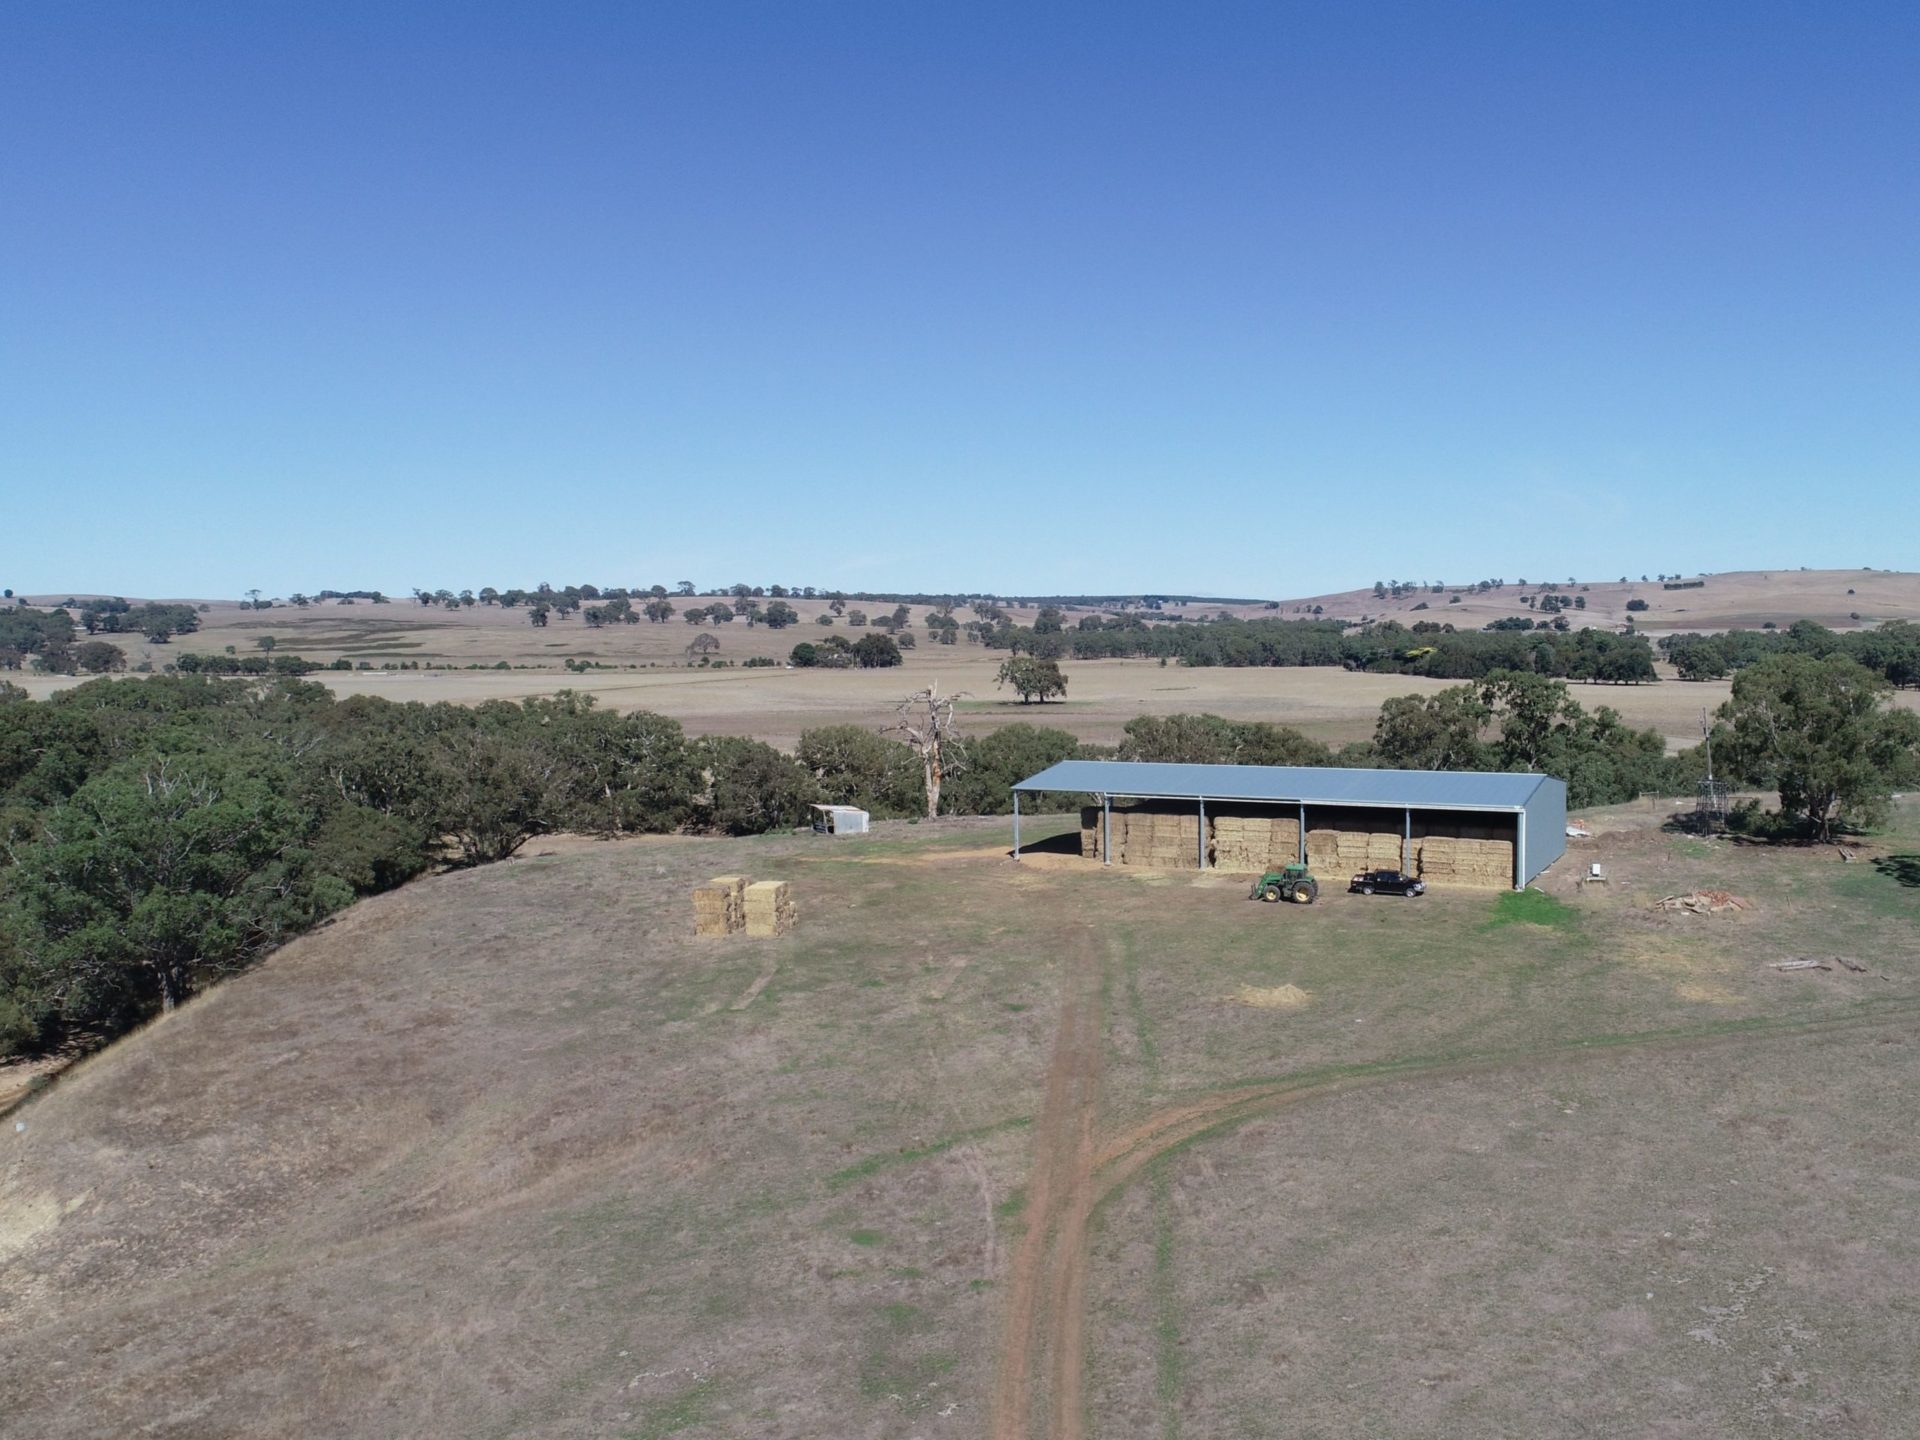 You are currently viewing 42.5m x 21m x 6m one-sided hay shed